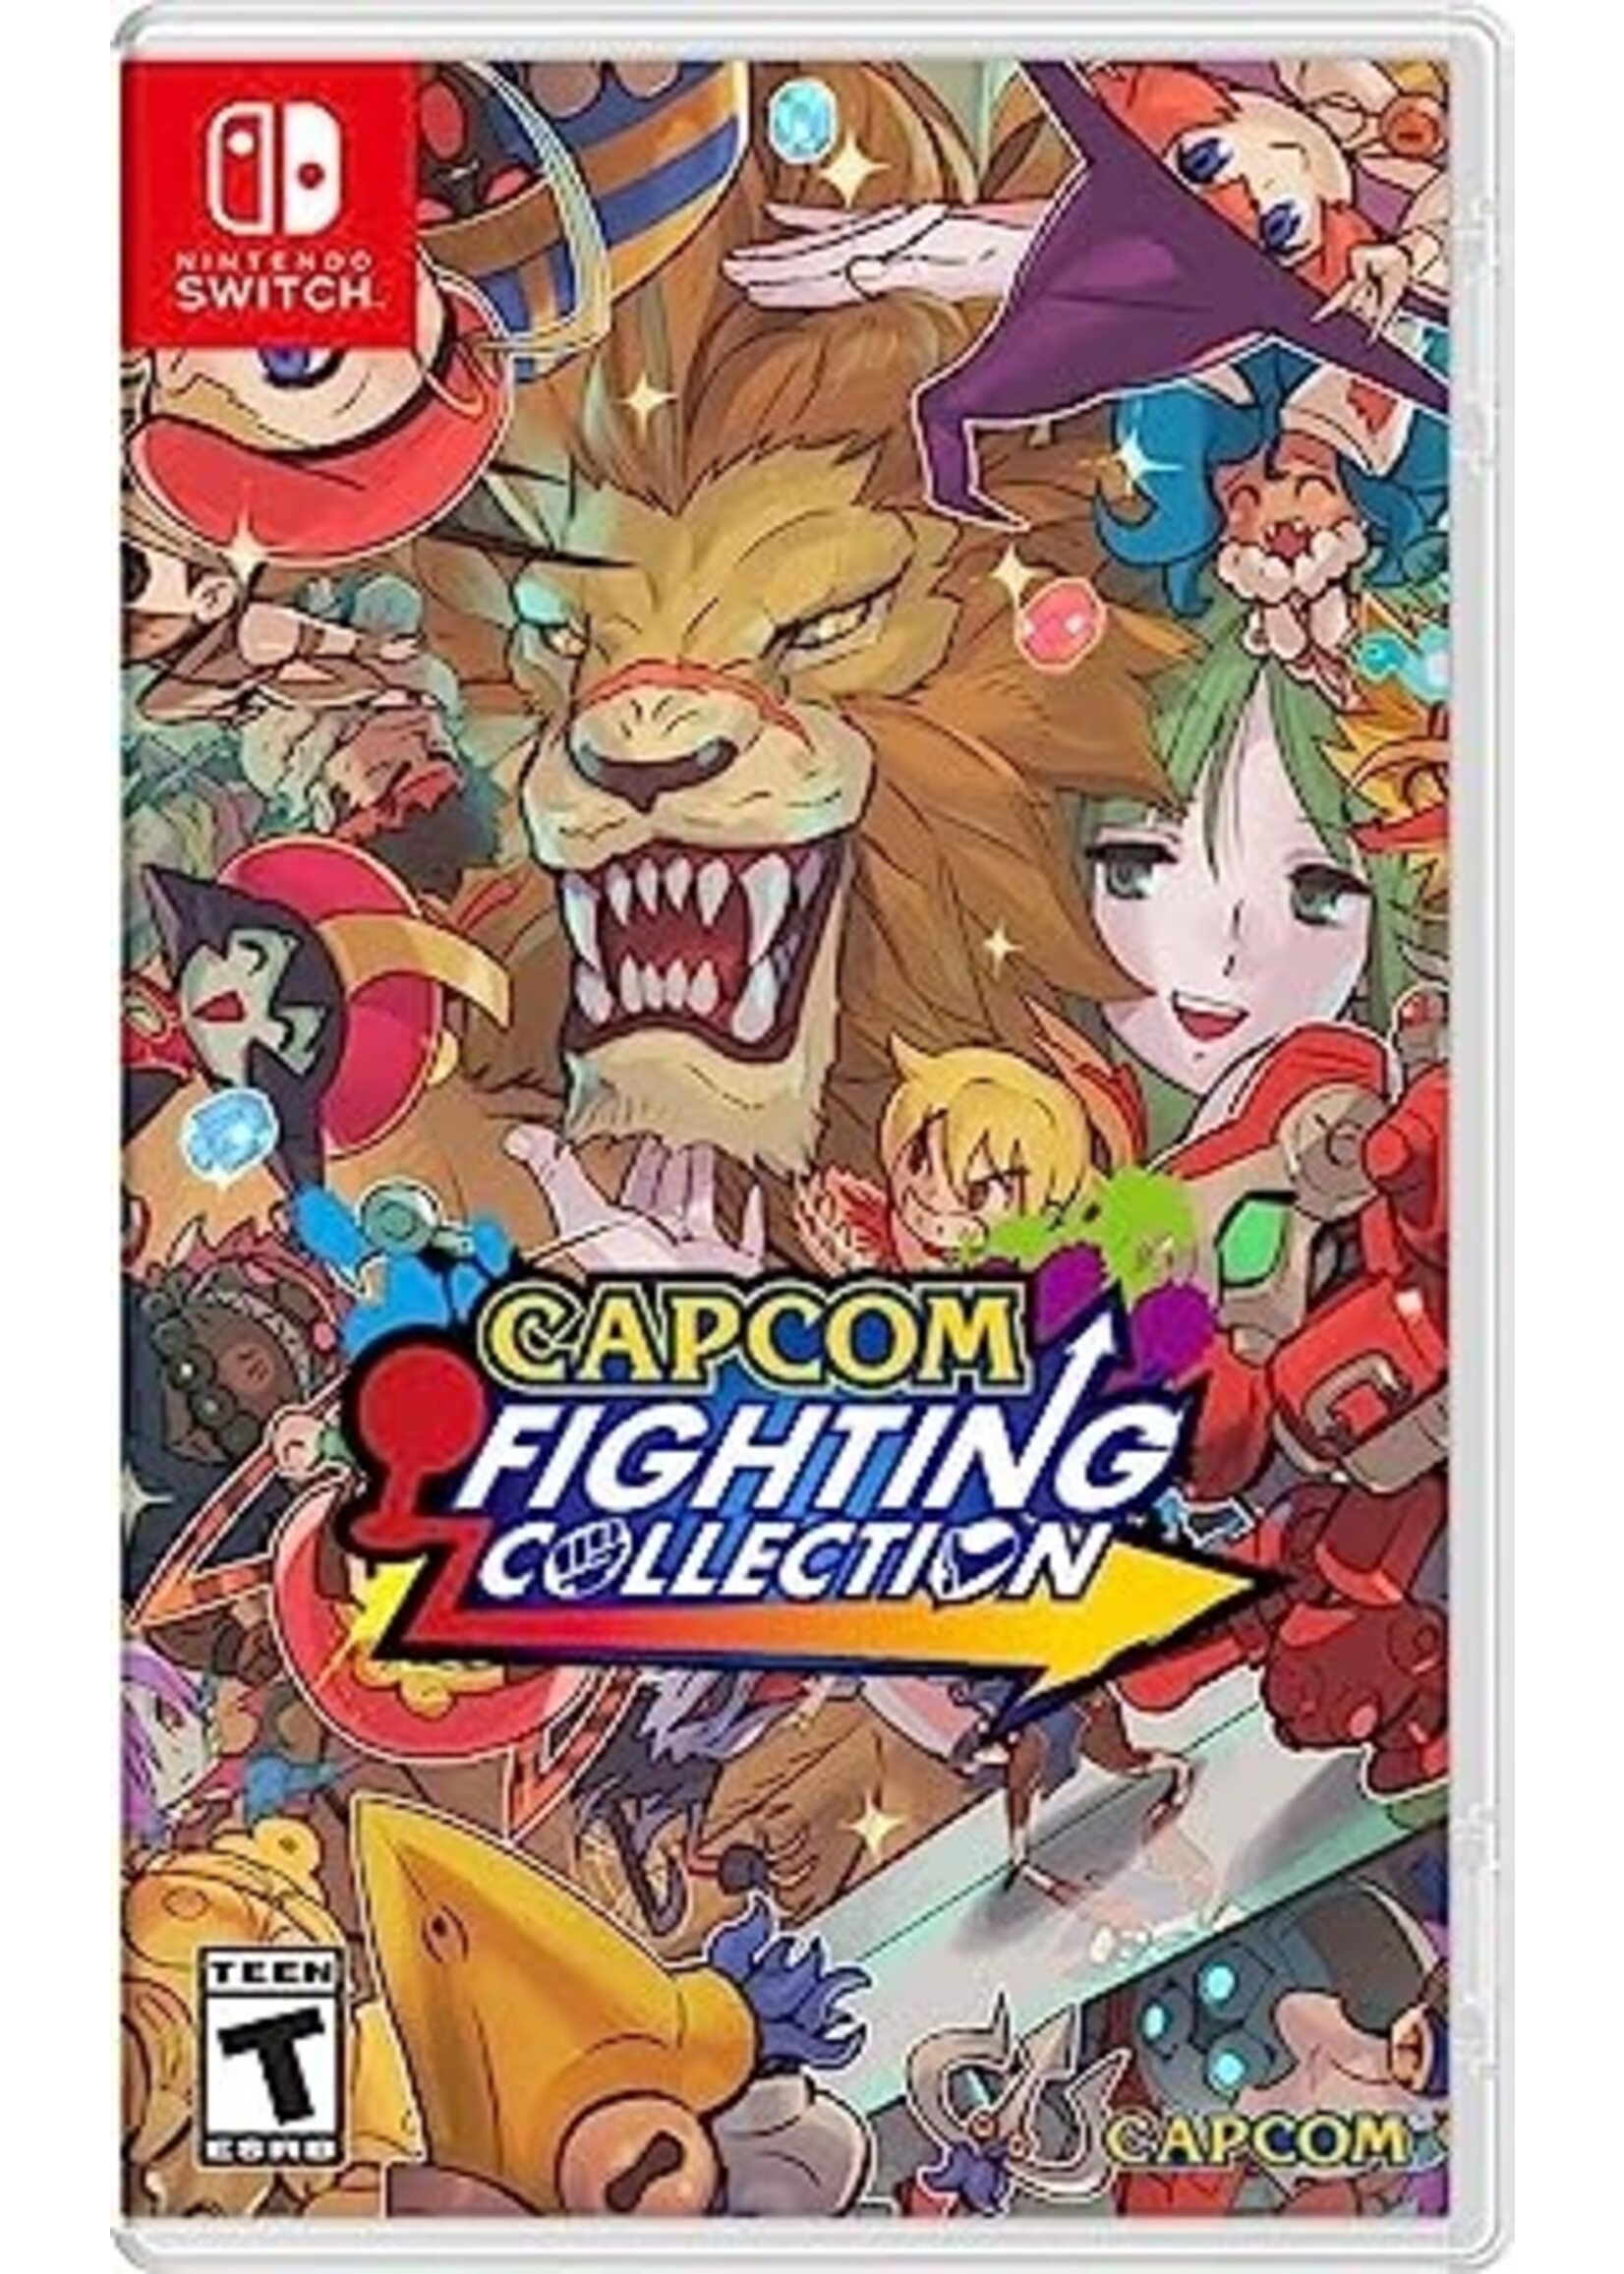 Capcom Fighting Collection NSW - SWITCH NEW